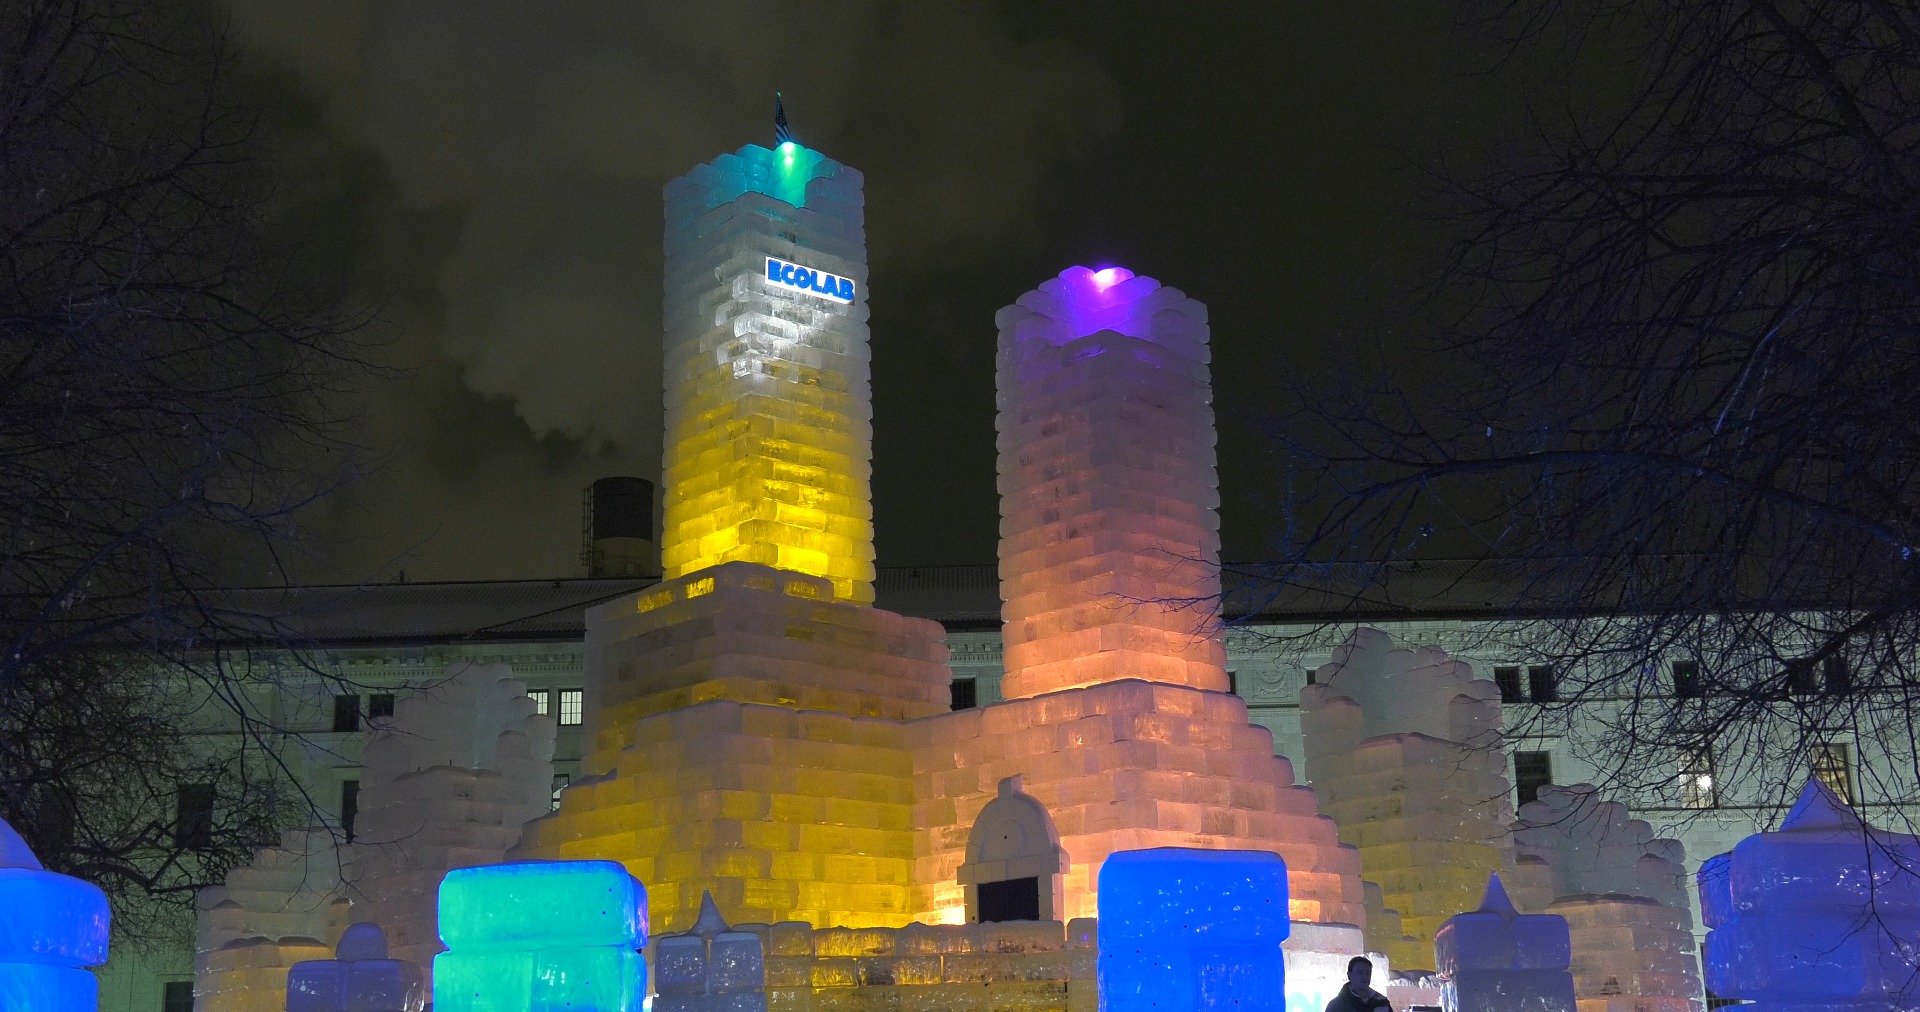 Showcore and Elation IP65 Fixtures Shine under Frigid Conditions of St. Paul Winter Carnival Gallery Image 14 